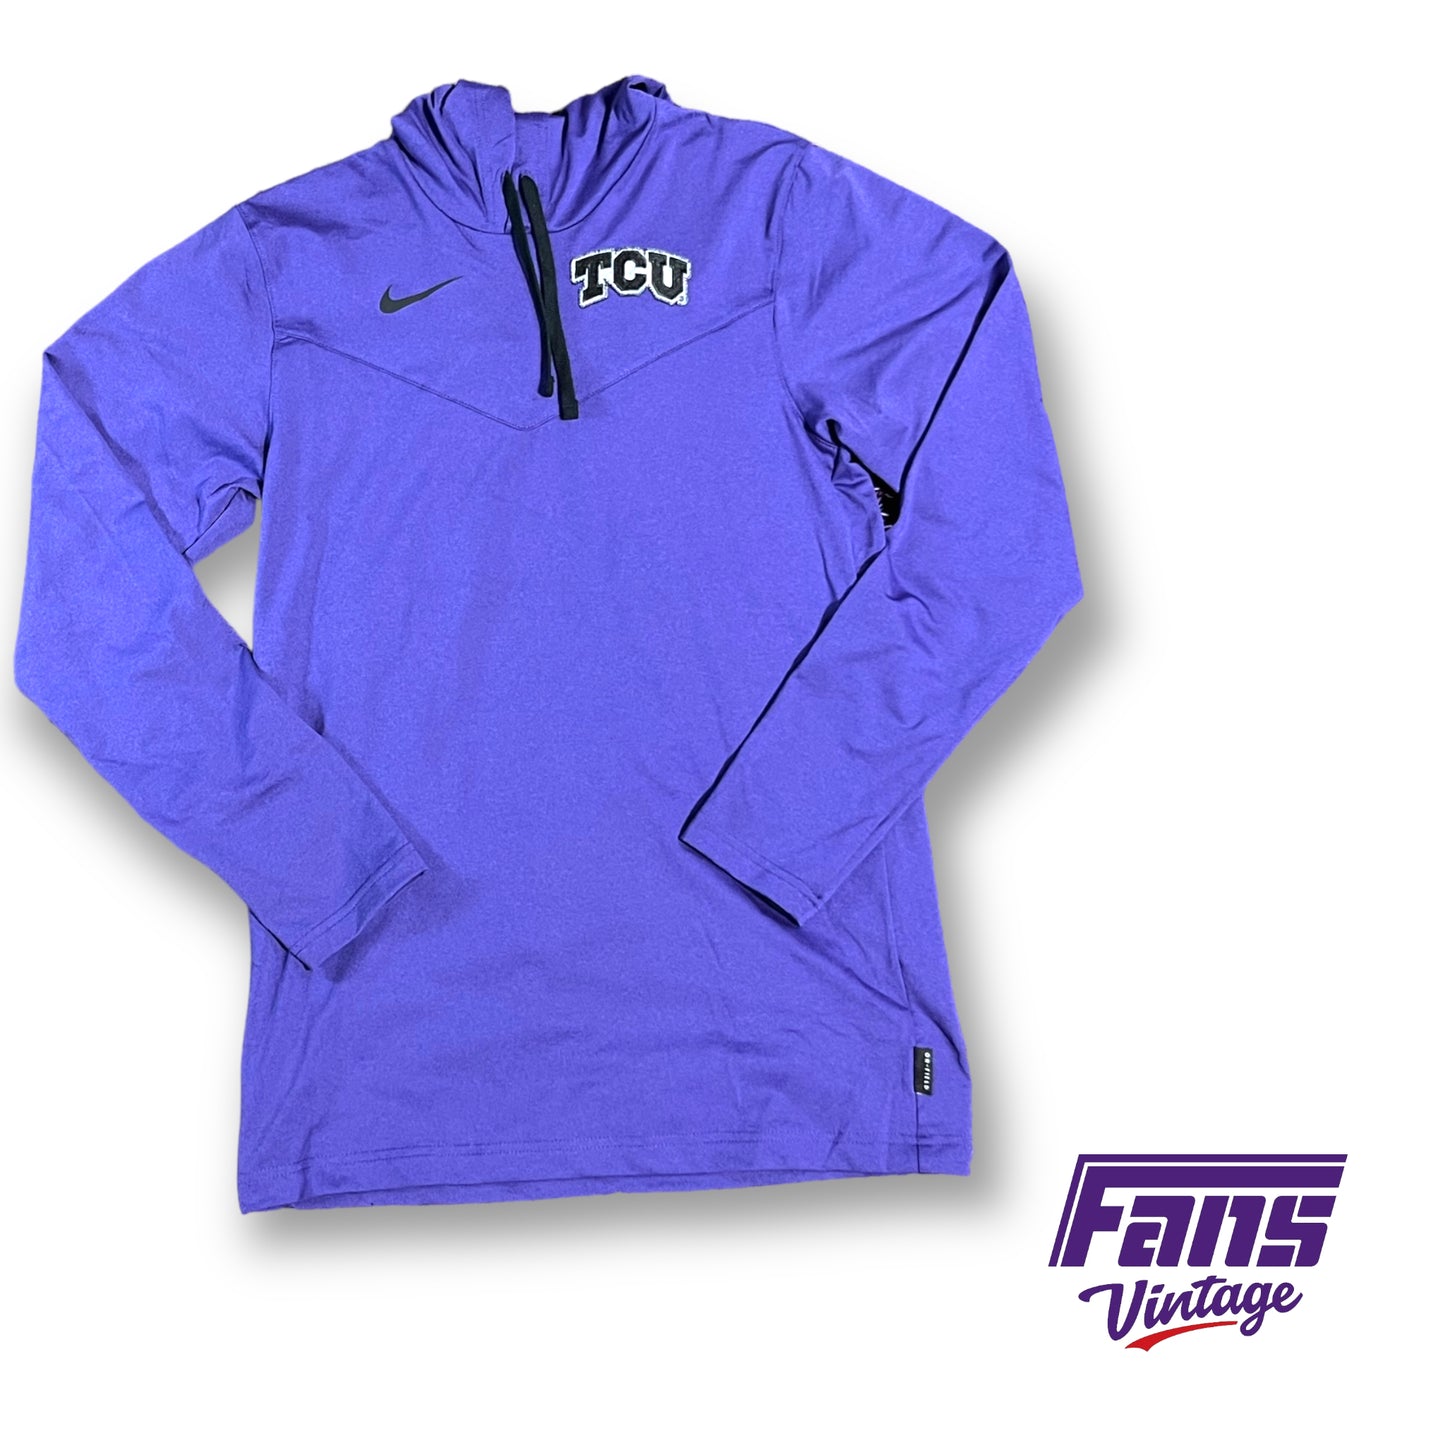 Special Edition Nike TCU team issued long sleeve hooded pullover